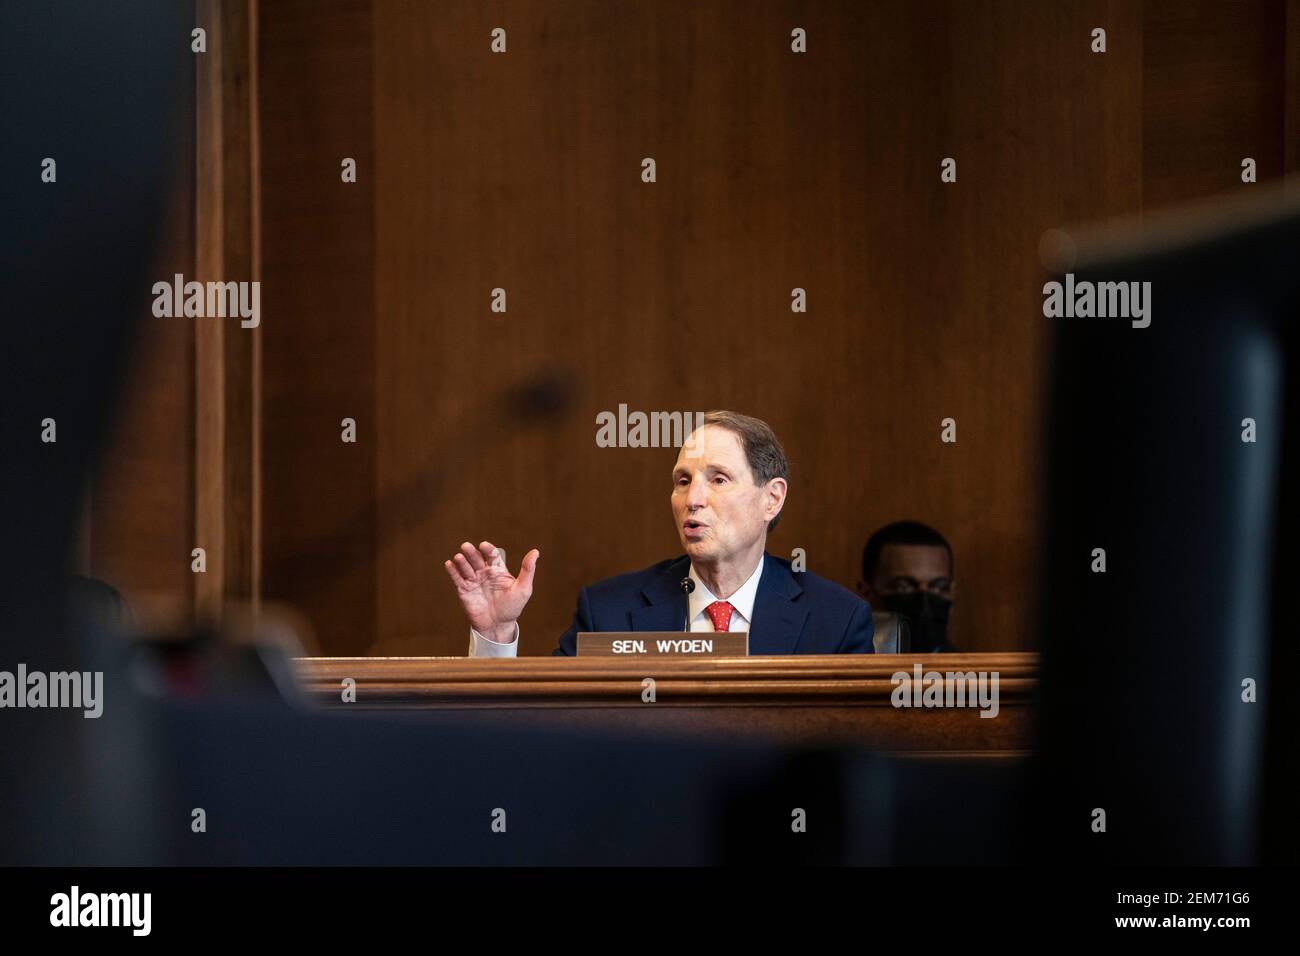 United States Senator Ron Wyden (Democrat of Oregon), speaks during a Senate Energy and Natural Resources Committee confirmation hearing for Representative Deb Haaland, a Democrat from New Mexico and secretary of the interior nominee for U.S. President Joe Biden, in Washington, DC, U.S., on Wednesday, Feb. 24, 2021. Haaland downplayed her past opposition to fracking during a heated hearing yesterday as she sought to reassure senators worried she would clamp down on fossil fuel development. Credit: Sarah Silbiger/Pool via CNP | usage worldwide Stock Photo